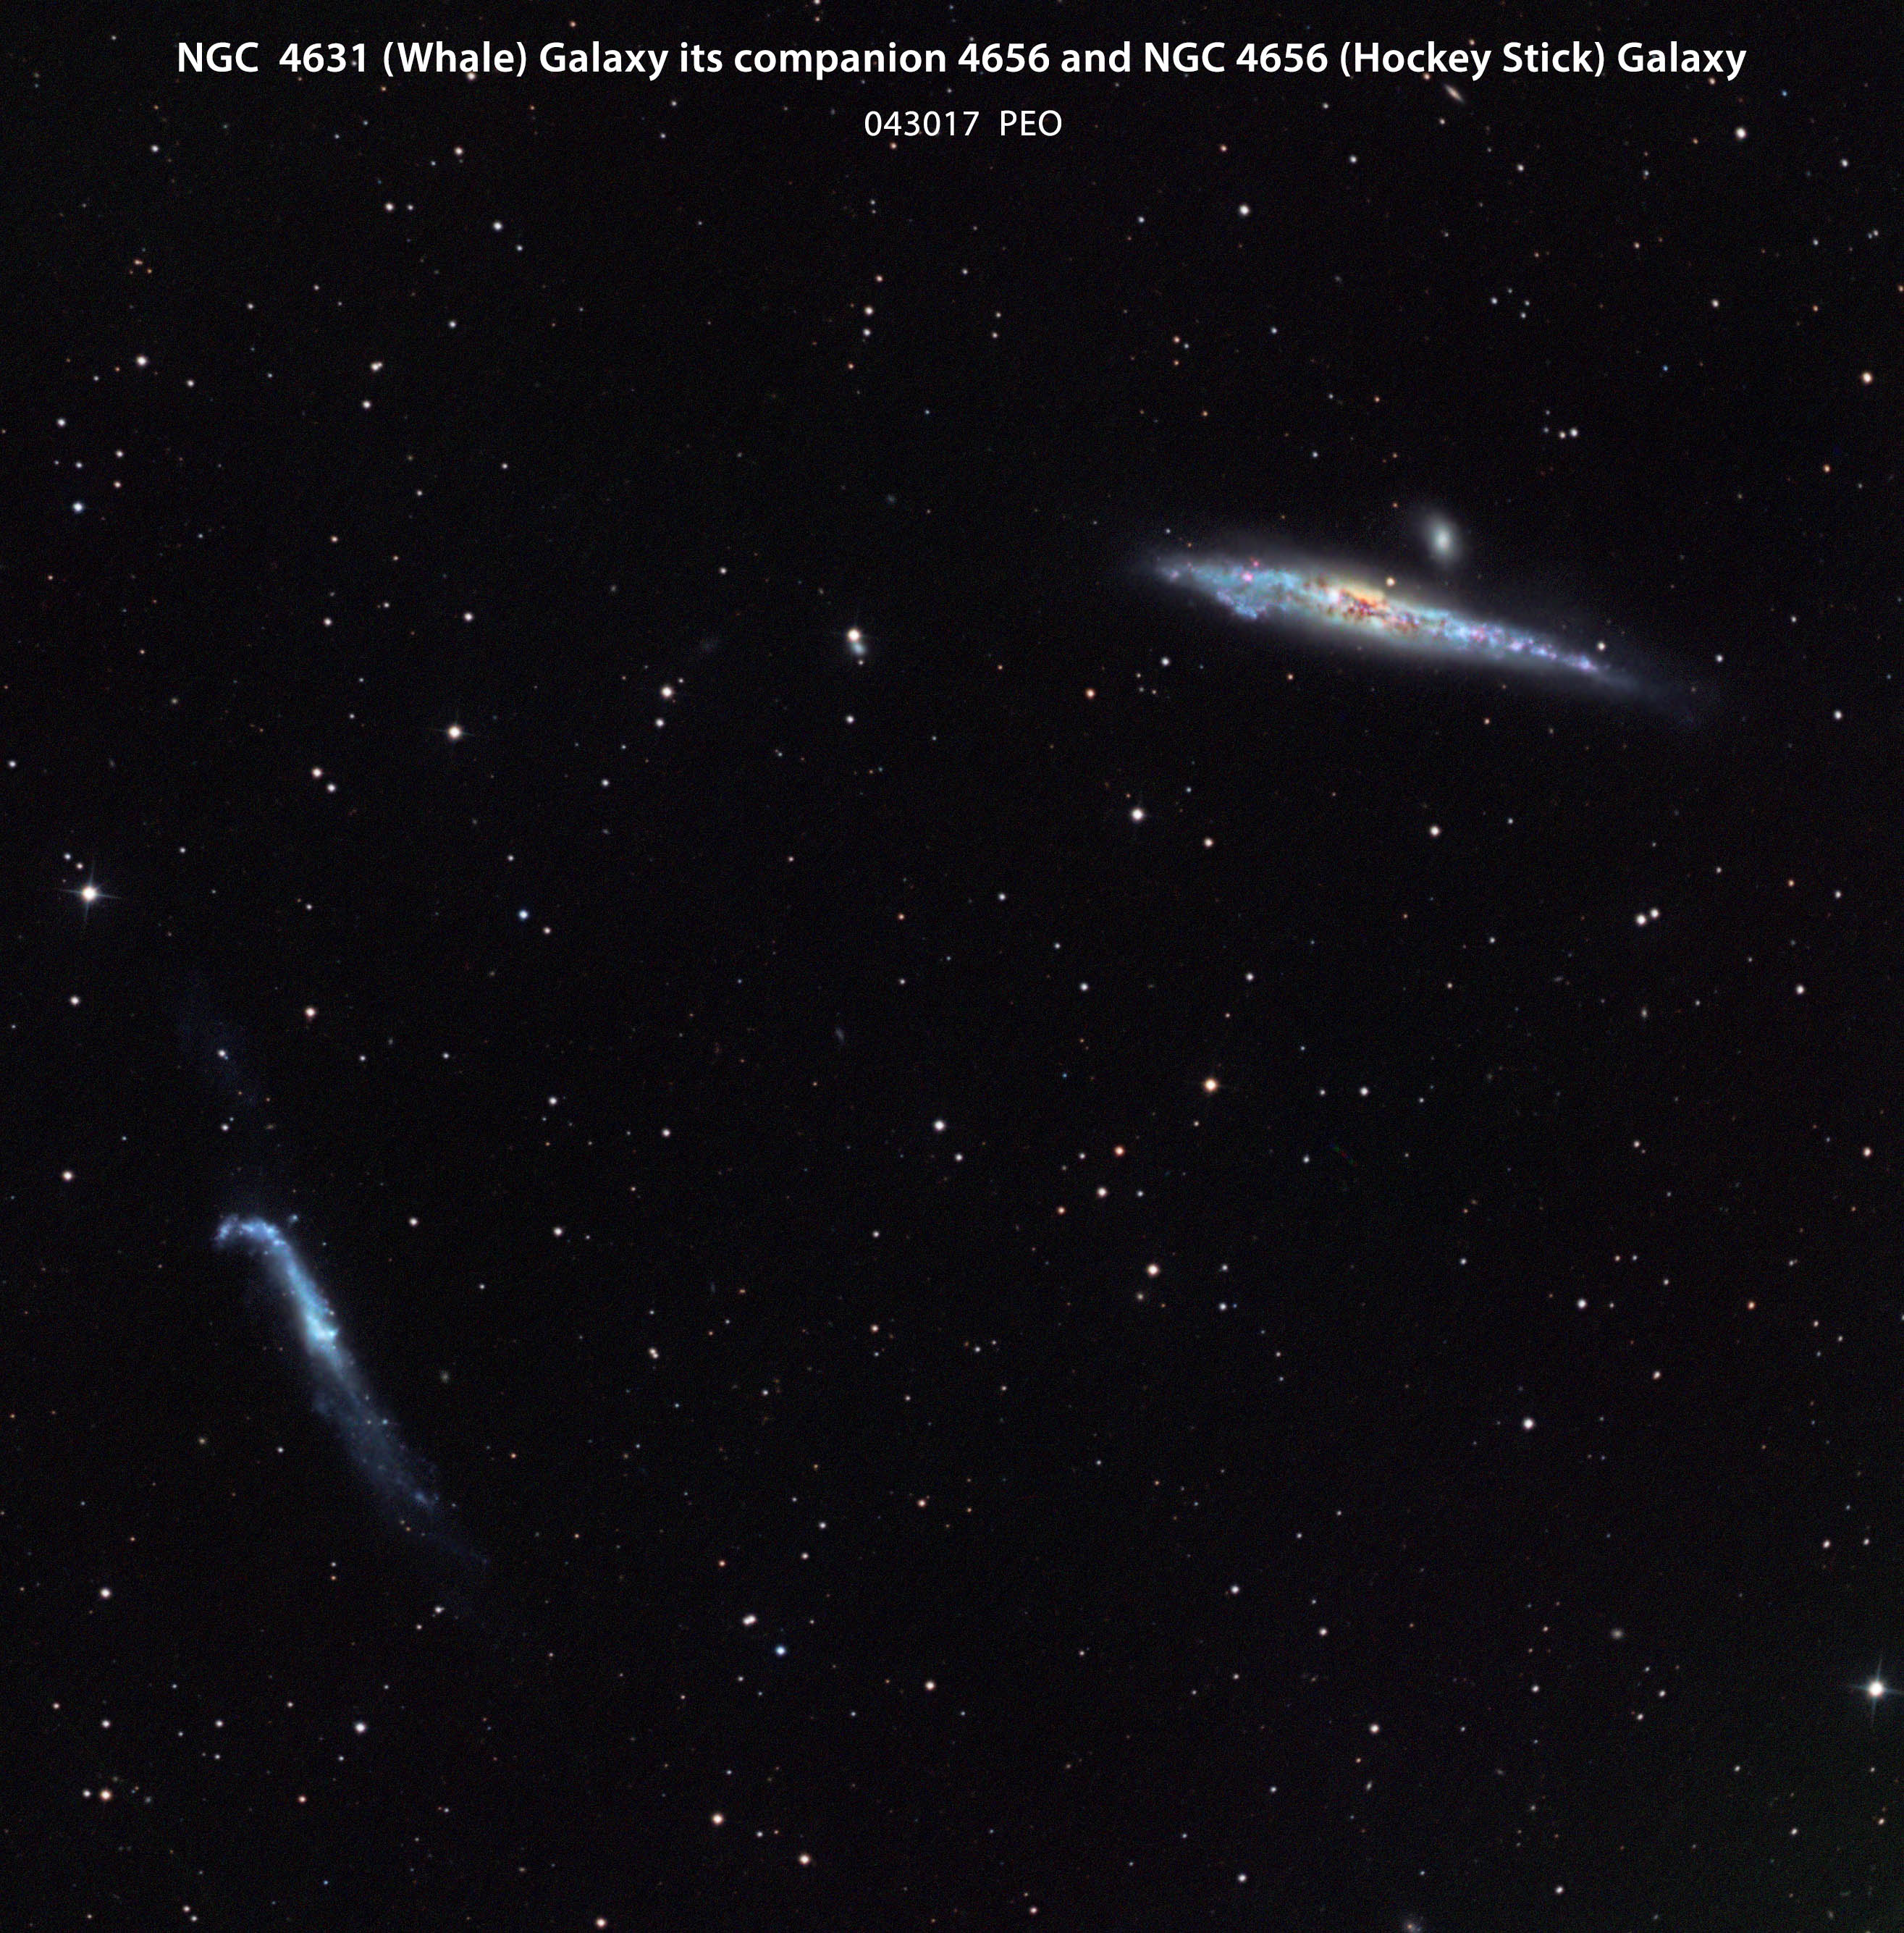 The Whale galaxy and the Hockey Stick